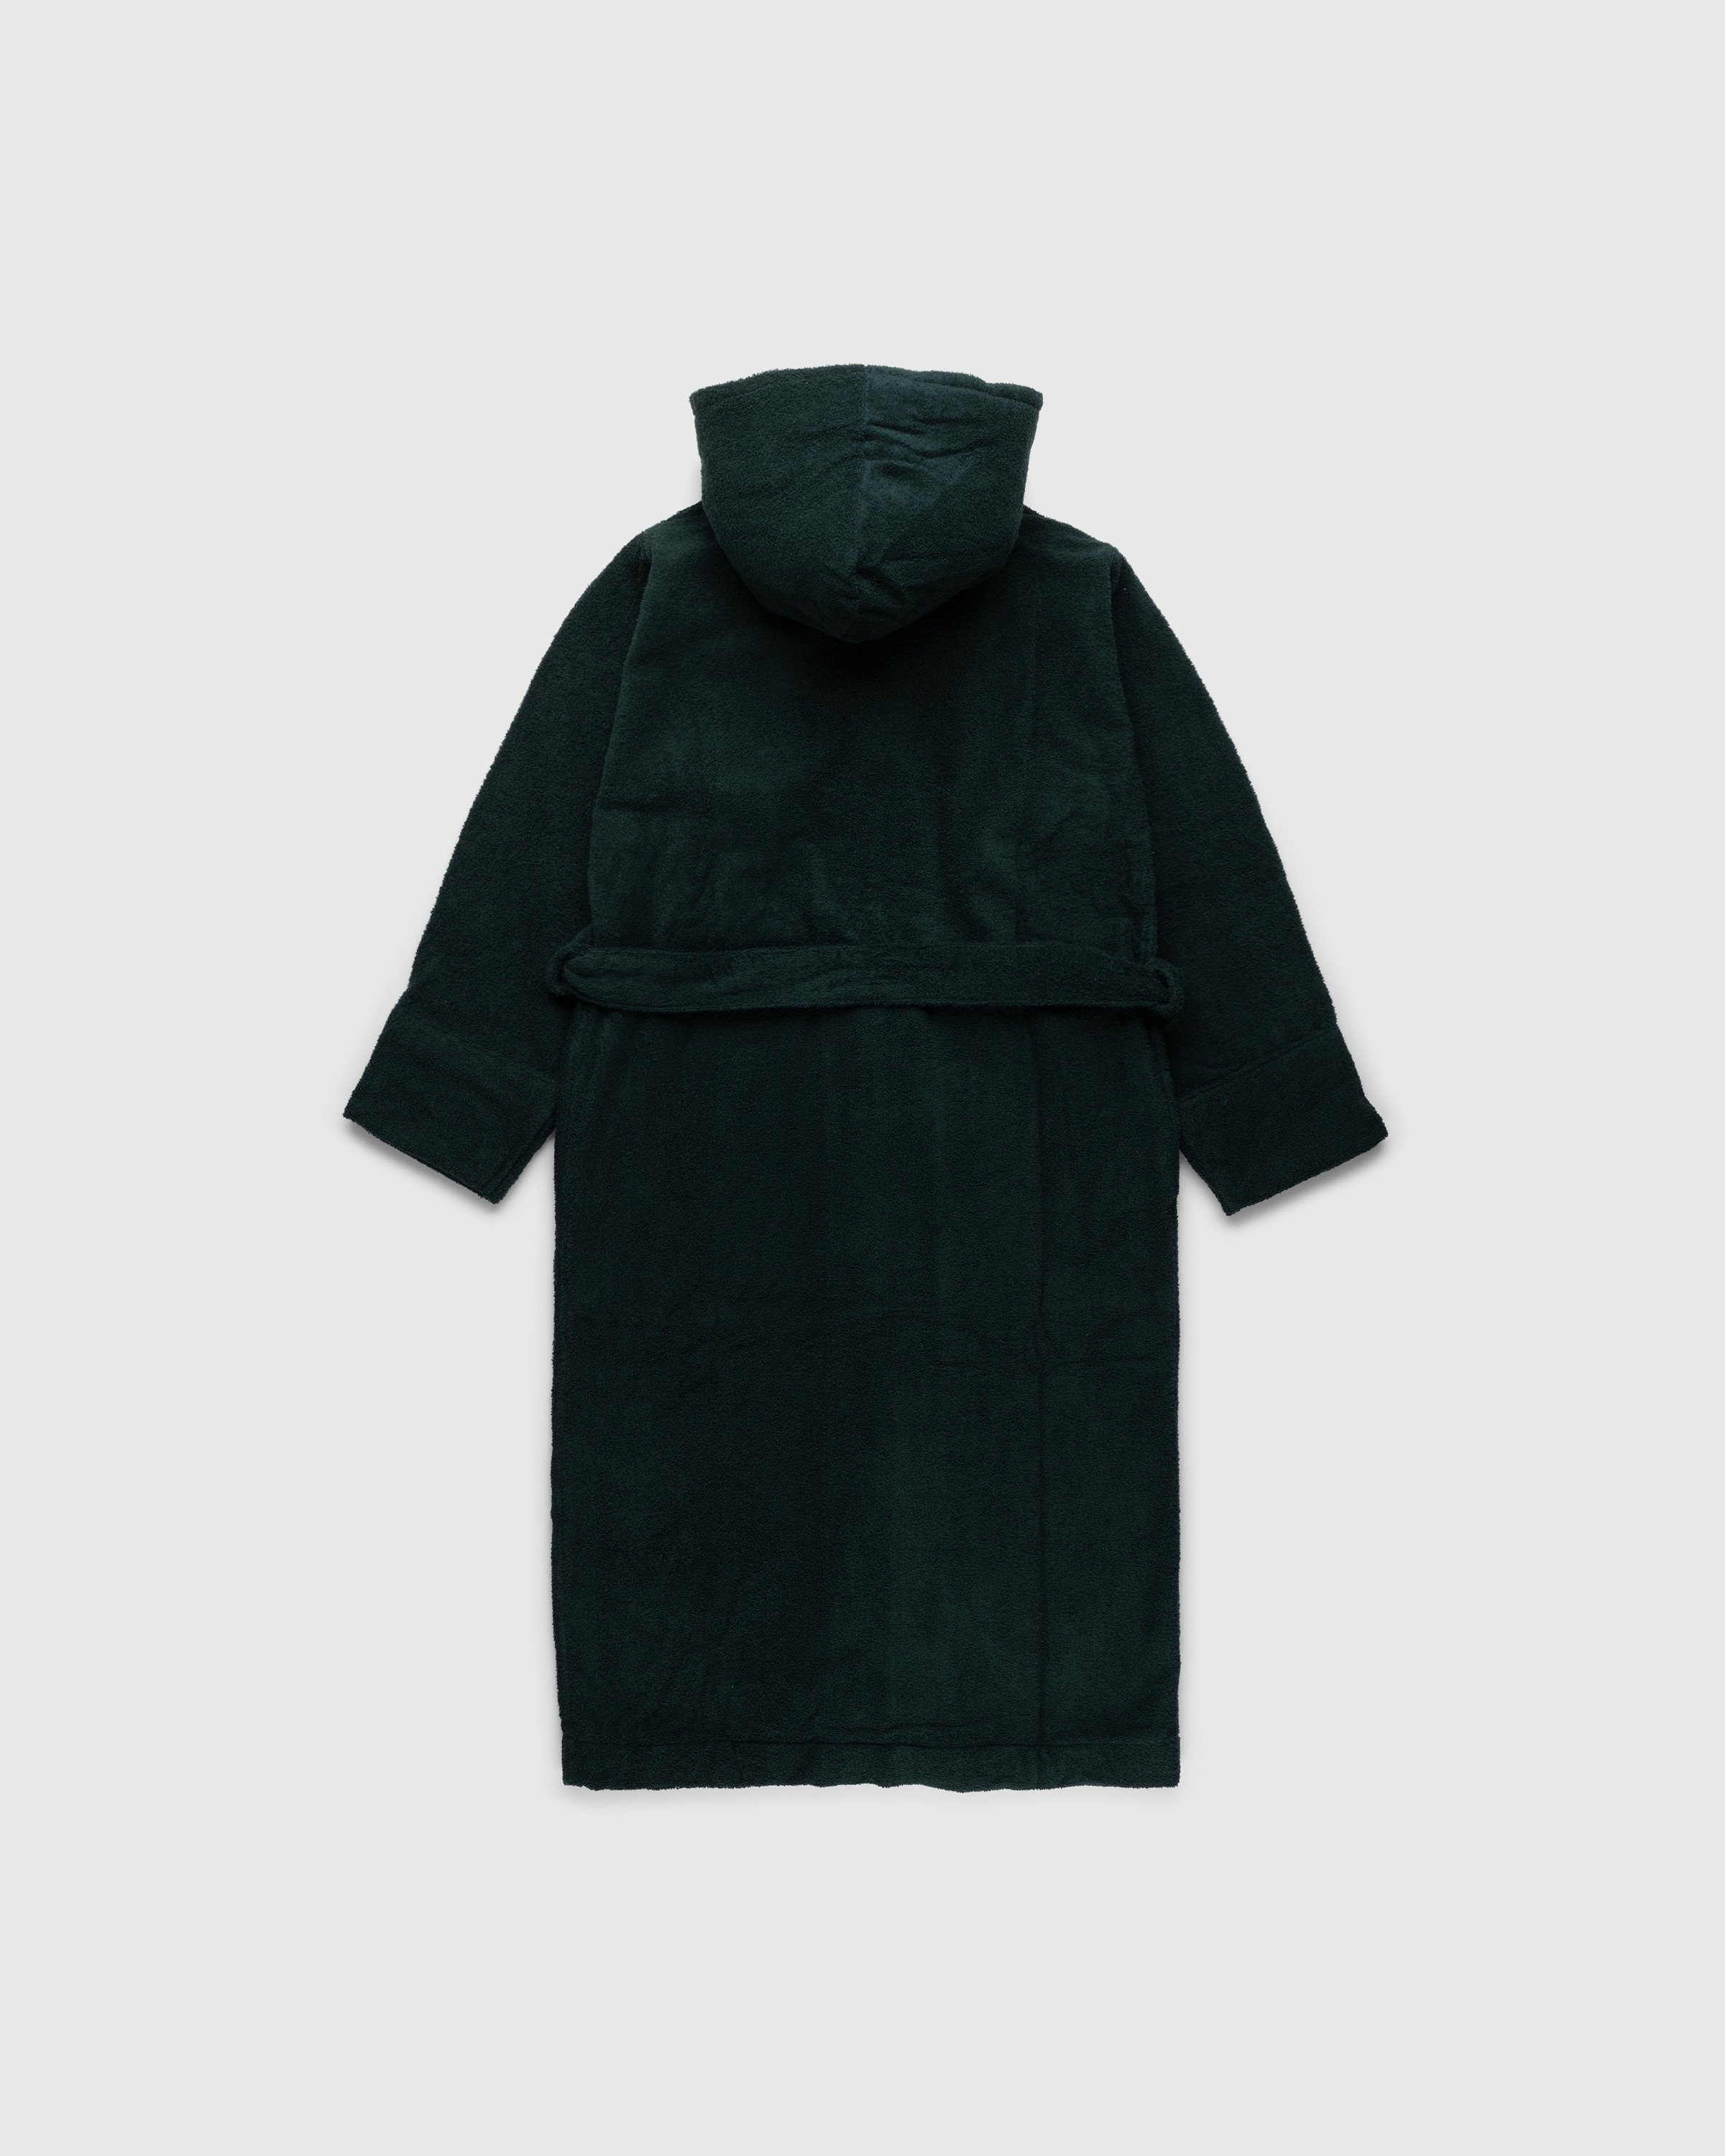 Tekla - Hooded Bathrobe Solid Forest Green - Lifestyle - Green - Image 2